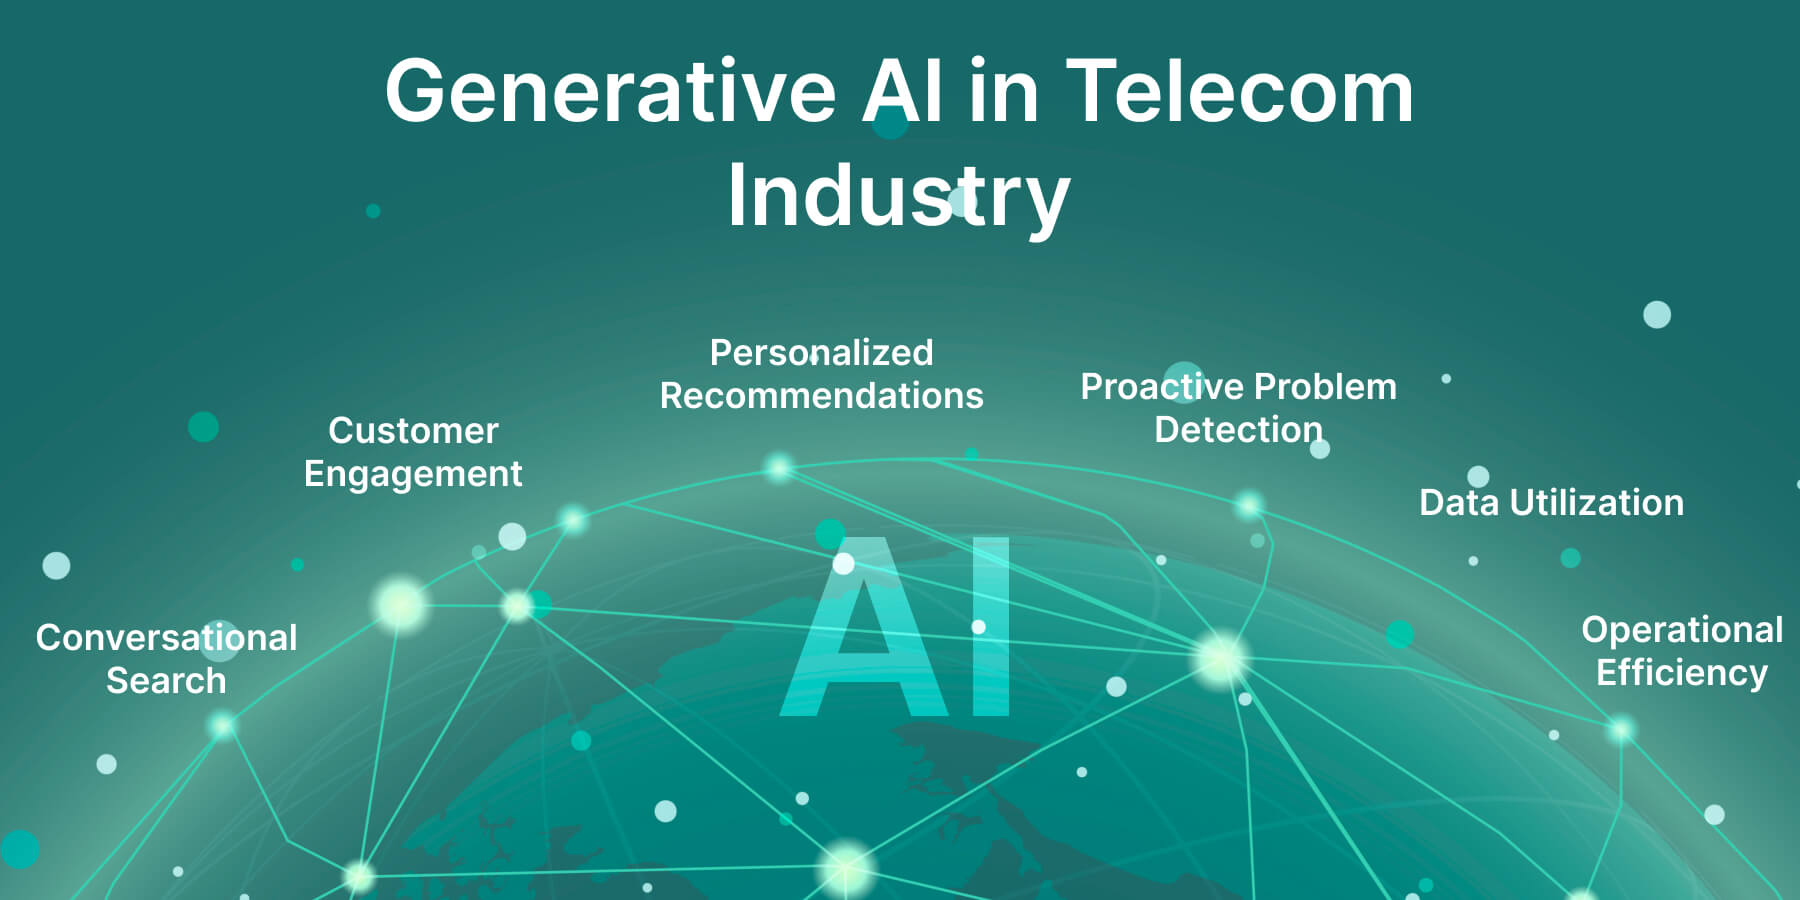 Generative AI in Telecom Industry: Use Cases & Benefits